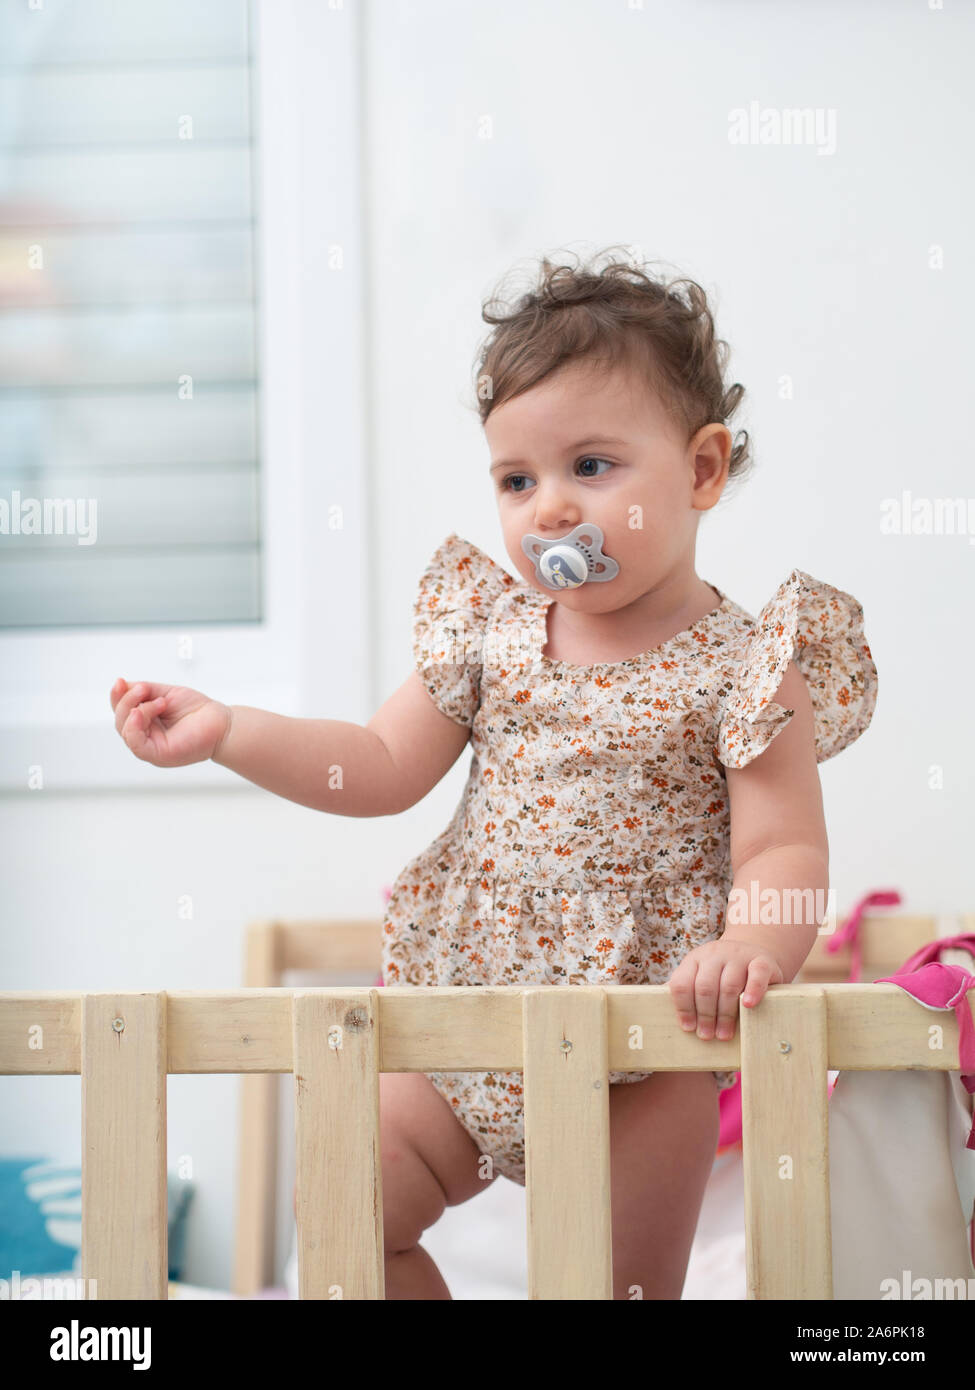 1 year old baby girl stands in her cot (or crib) Stock Photo